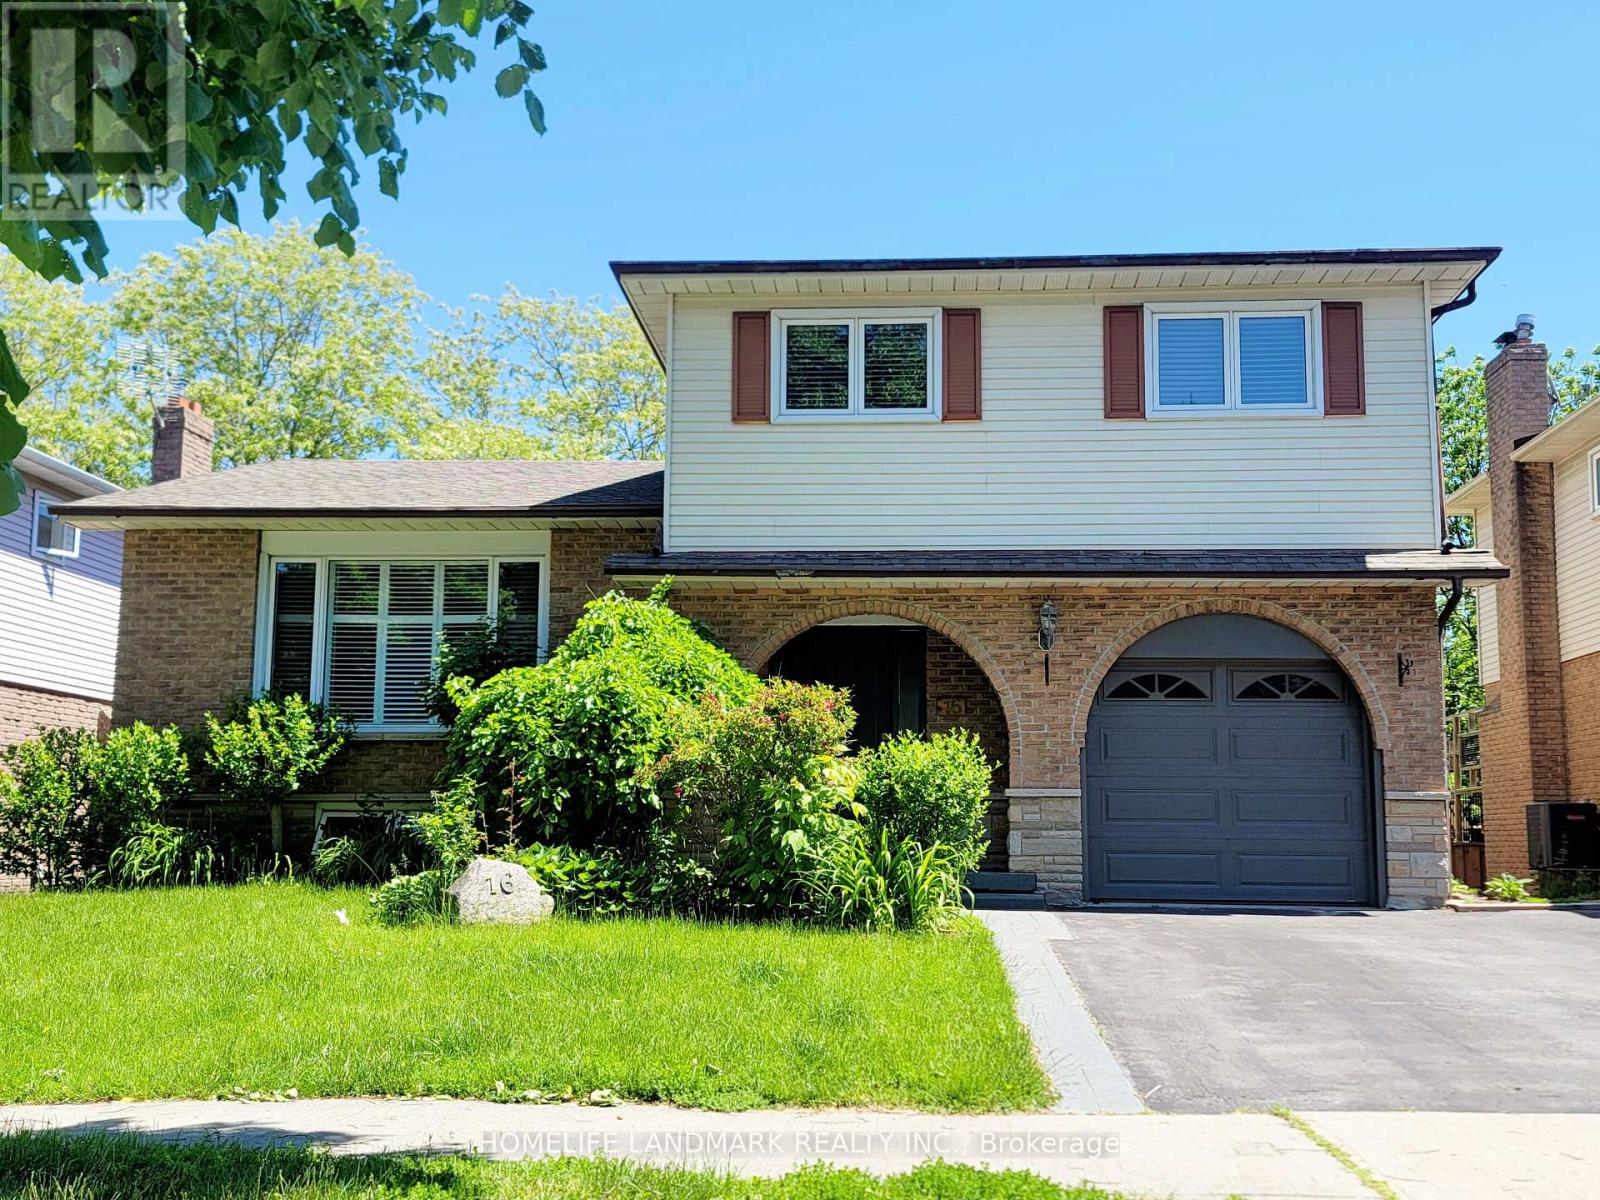 16 MANSFIELD CRESCENT, whitby, Ontario